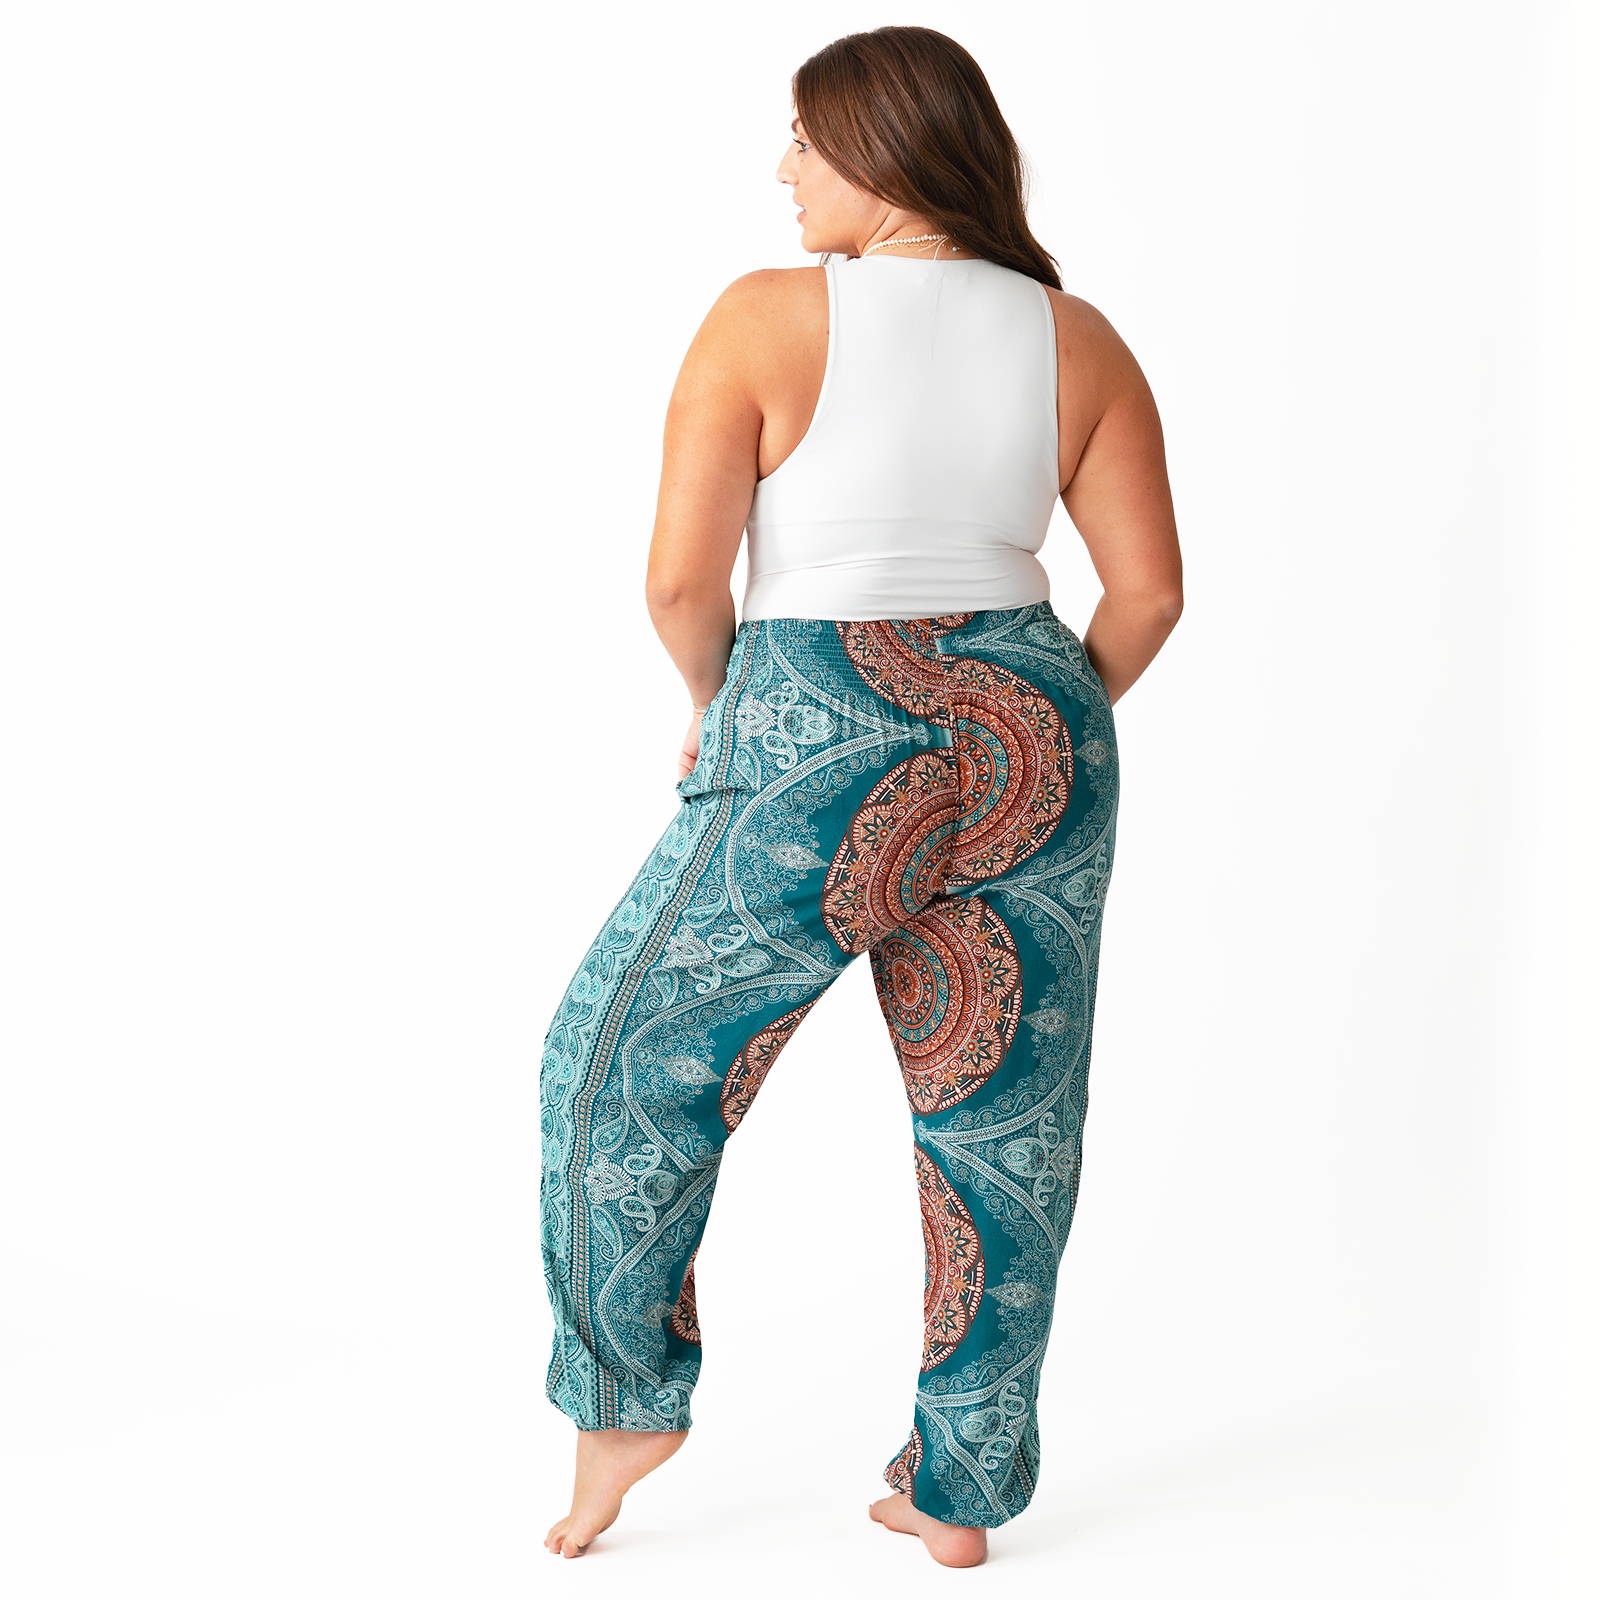 Back View of a Woman in Teal and Orange Harem Pants